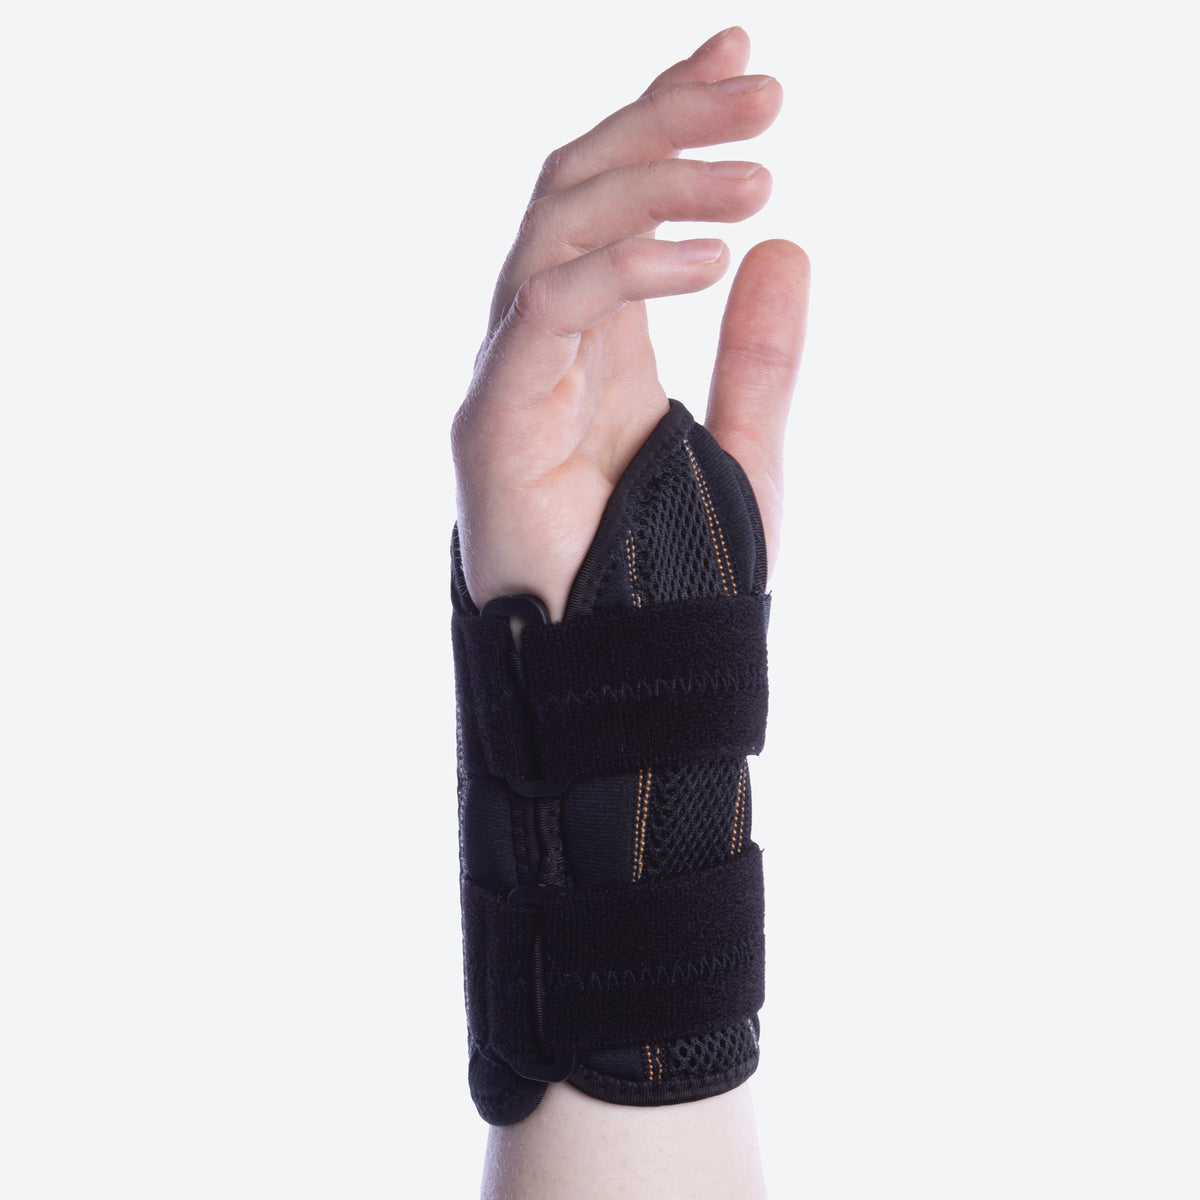 Equate Adjustable Copper Infused Wrist Splint Support, Black, One Size,  Fits Left or Right